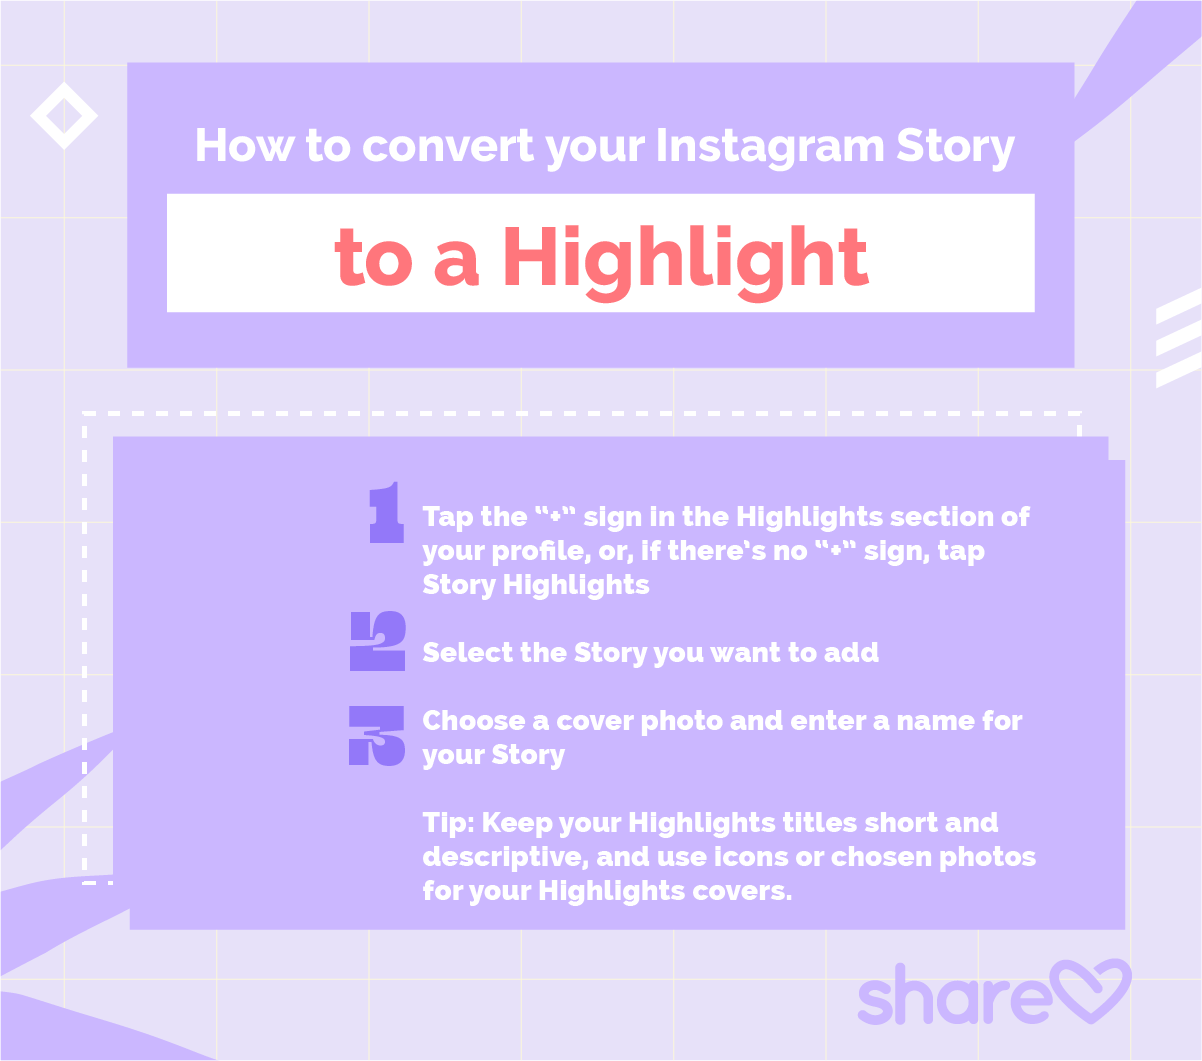 How to convert your Instagram Story to a Highlight